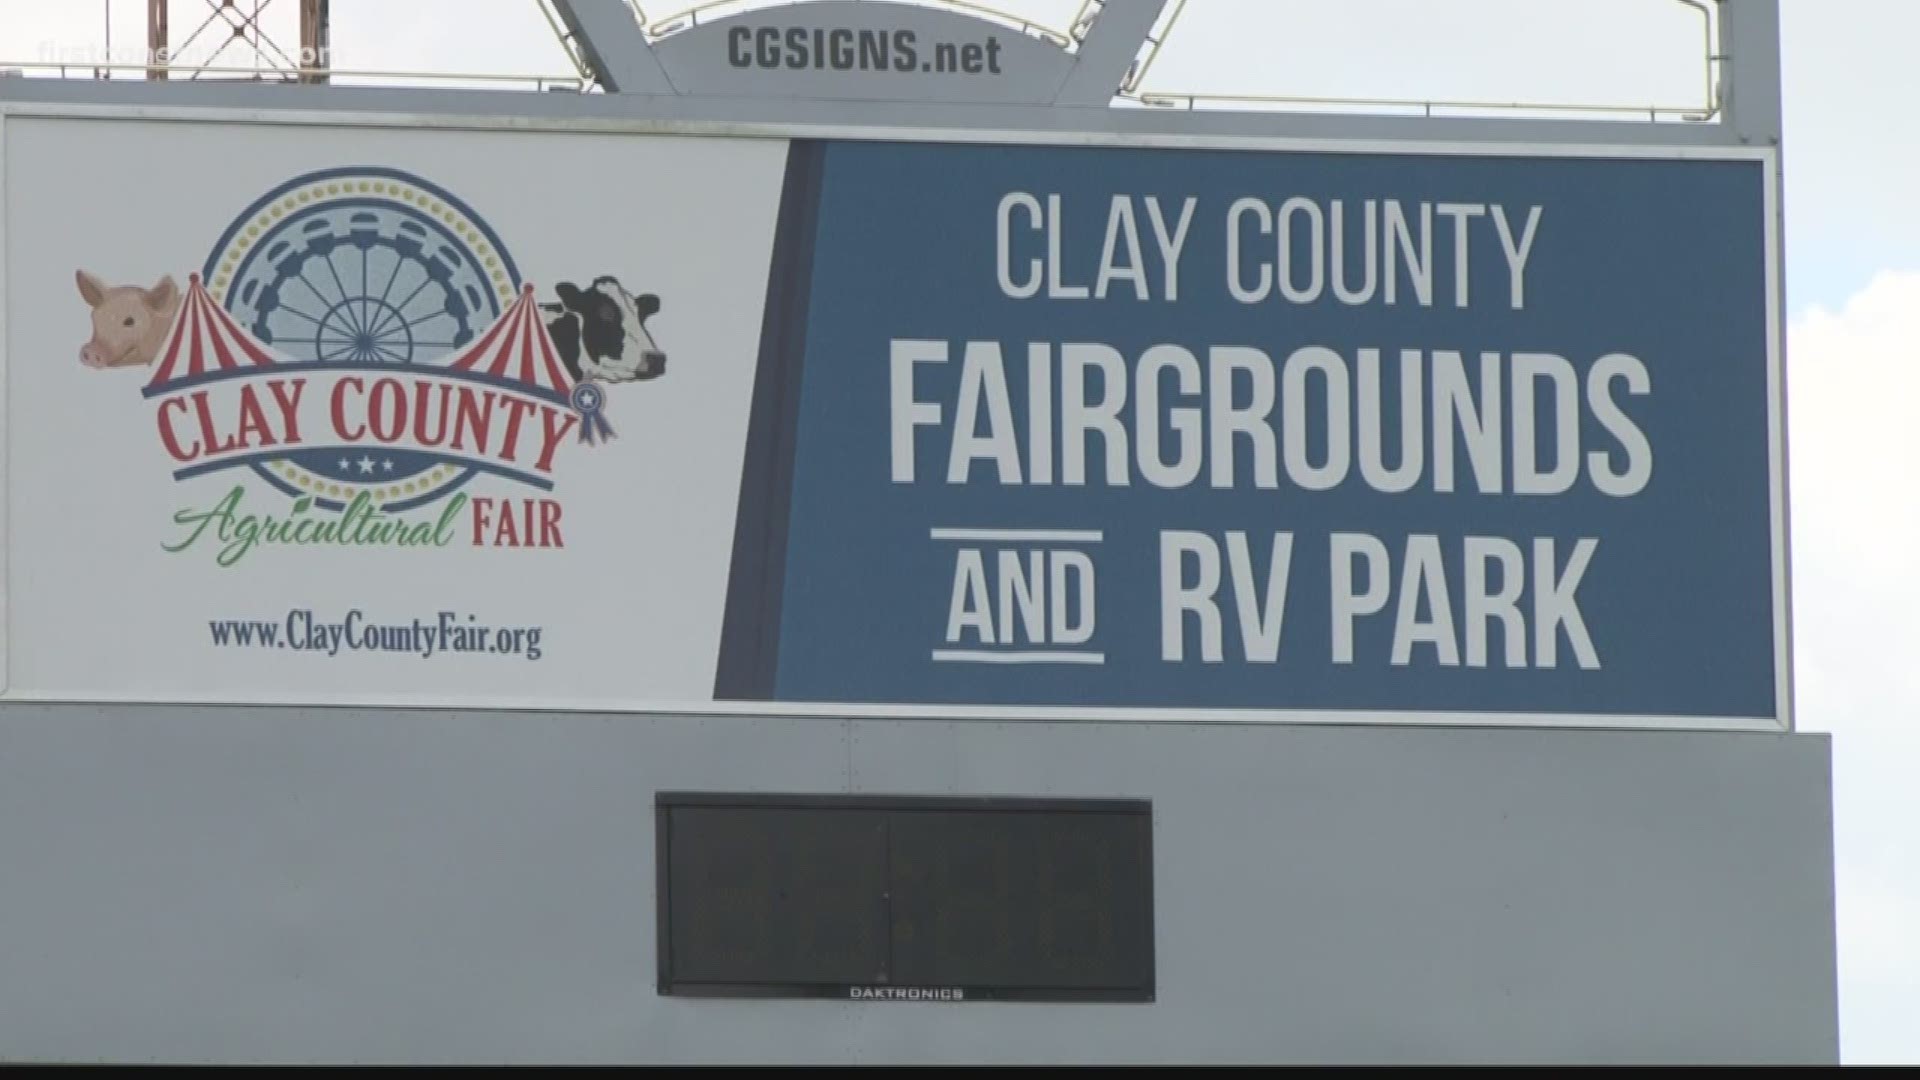 After more than a decade, the Clay County Fairgrounds BBQ and beer festival Ham Jam is back.